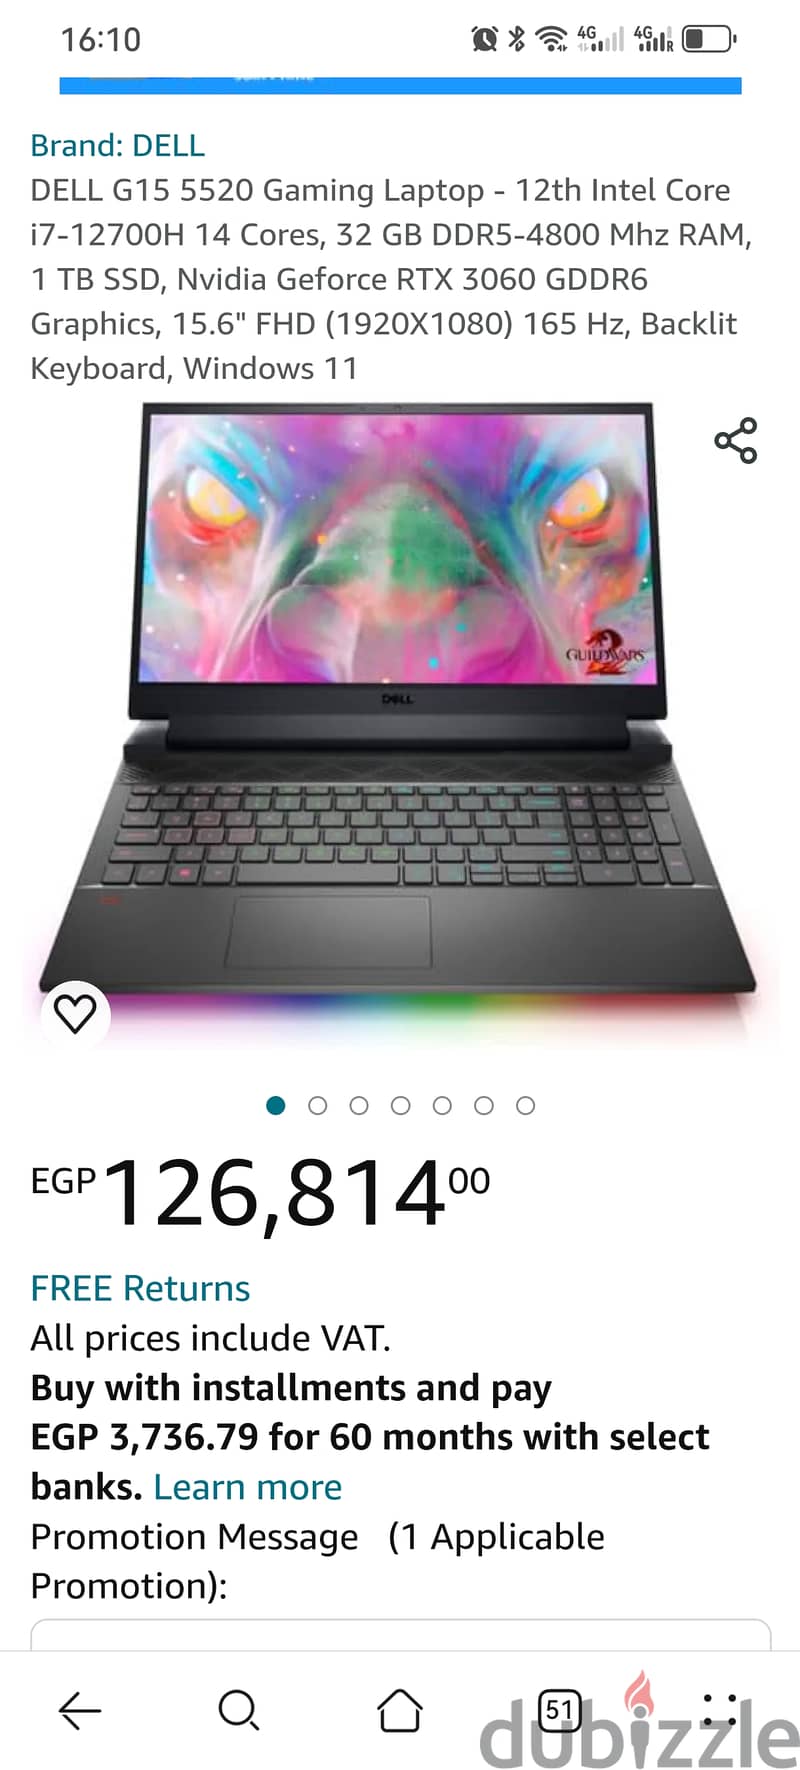 99 new, 2TB, DELL G15 5520, 60000 cheaper than the official website 2